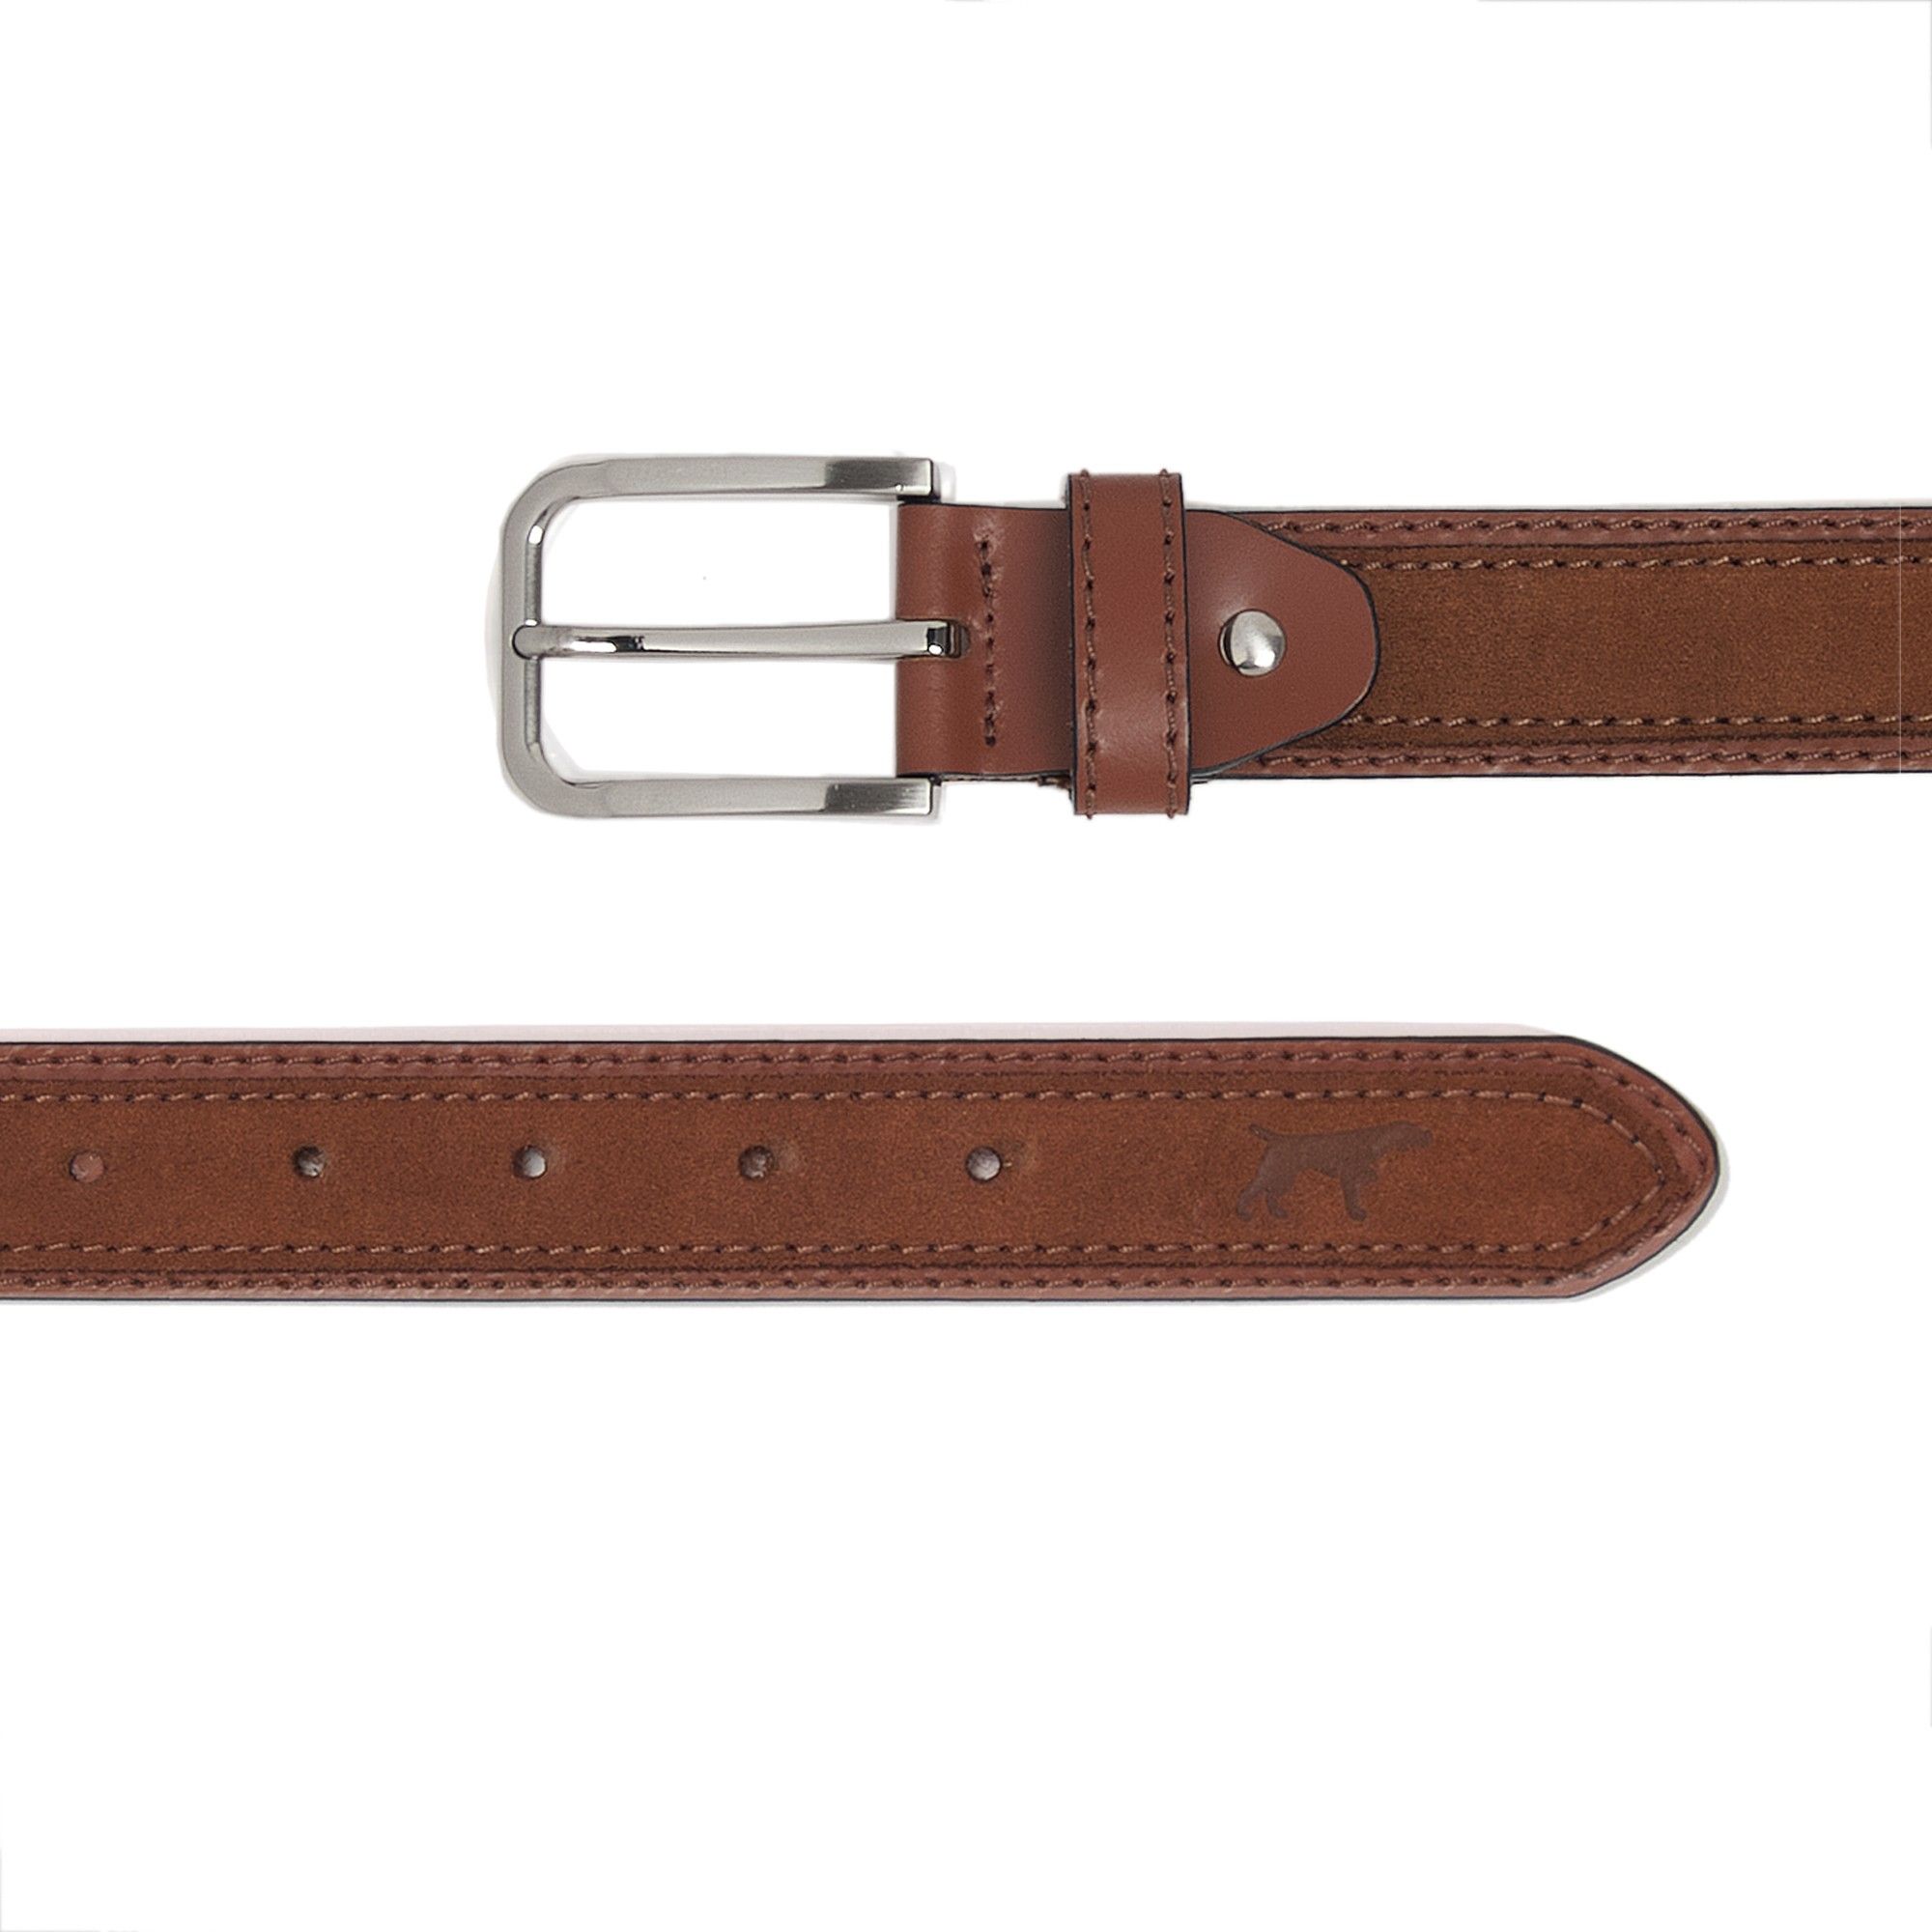 Castellanisimos men's belt with double skin and double stitched detail. Metal buckle. Width: 3.5 cm. This product is made in Spain.